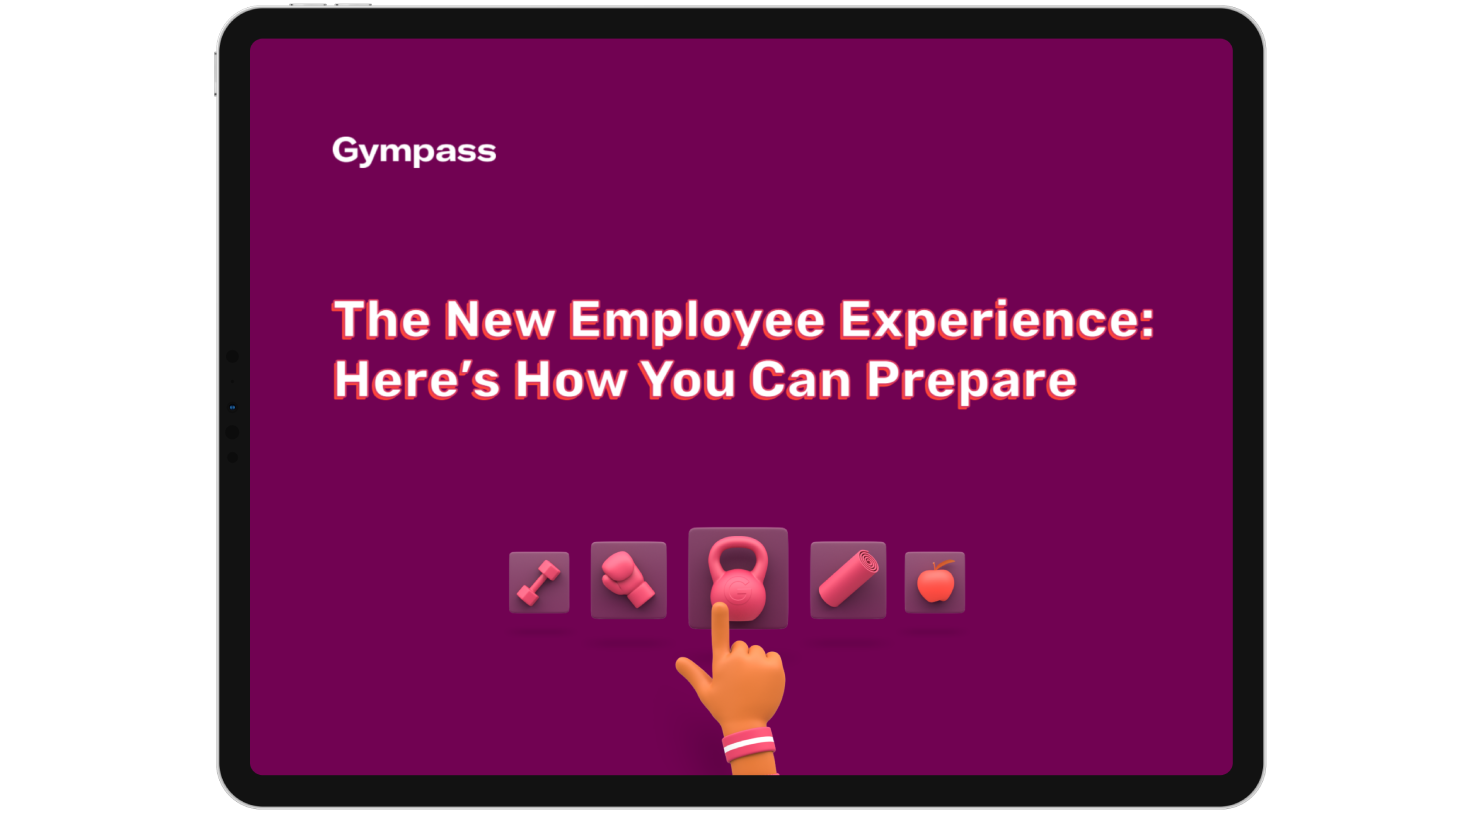 The New Employee Experience: Here's How You Can Prepare